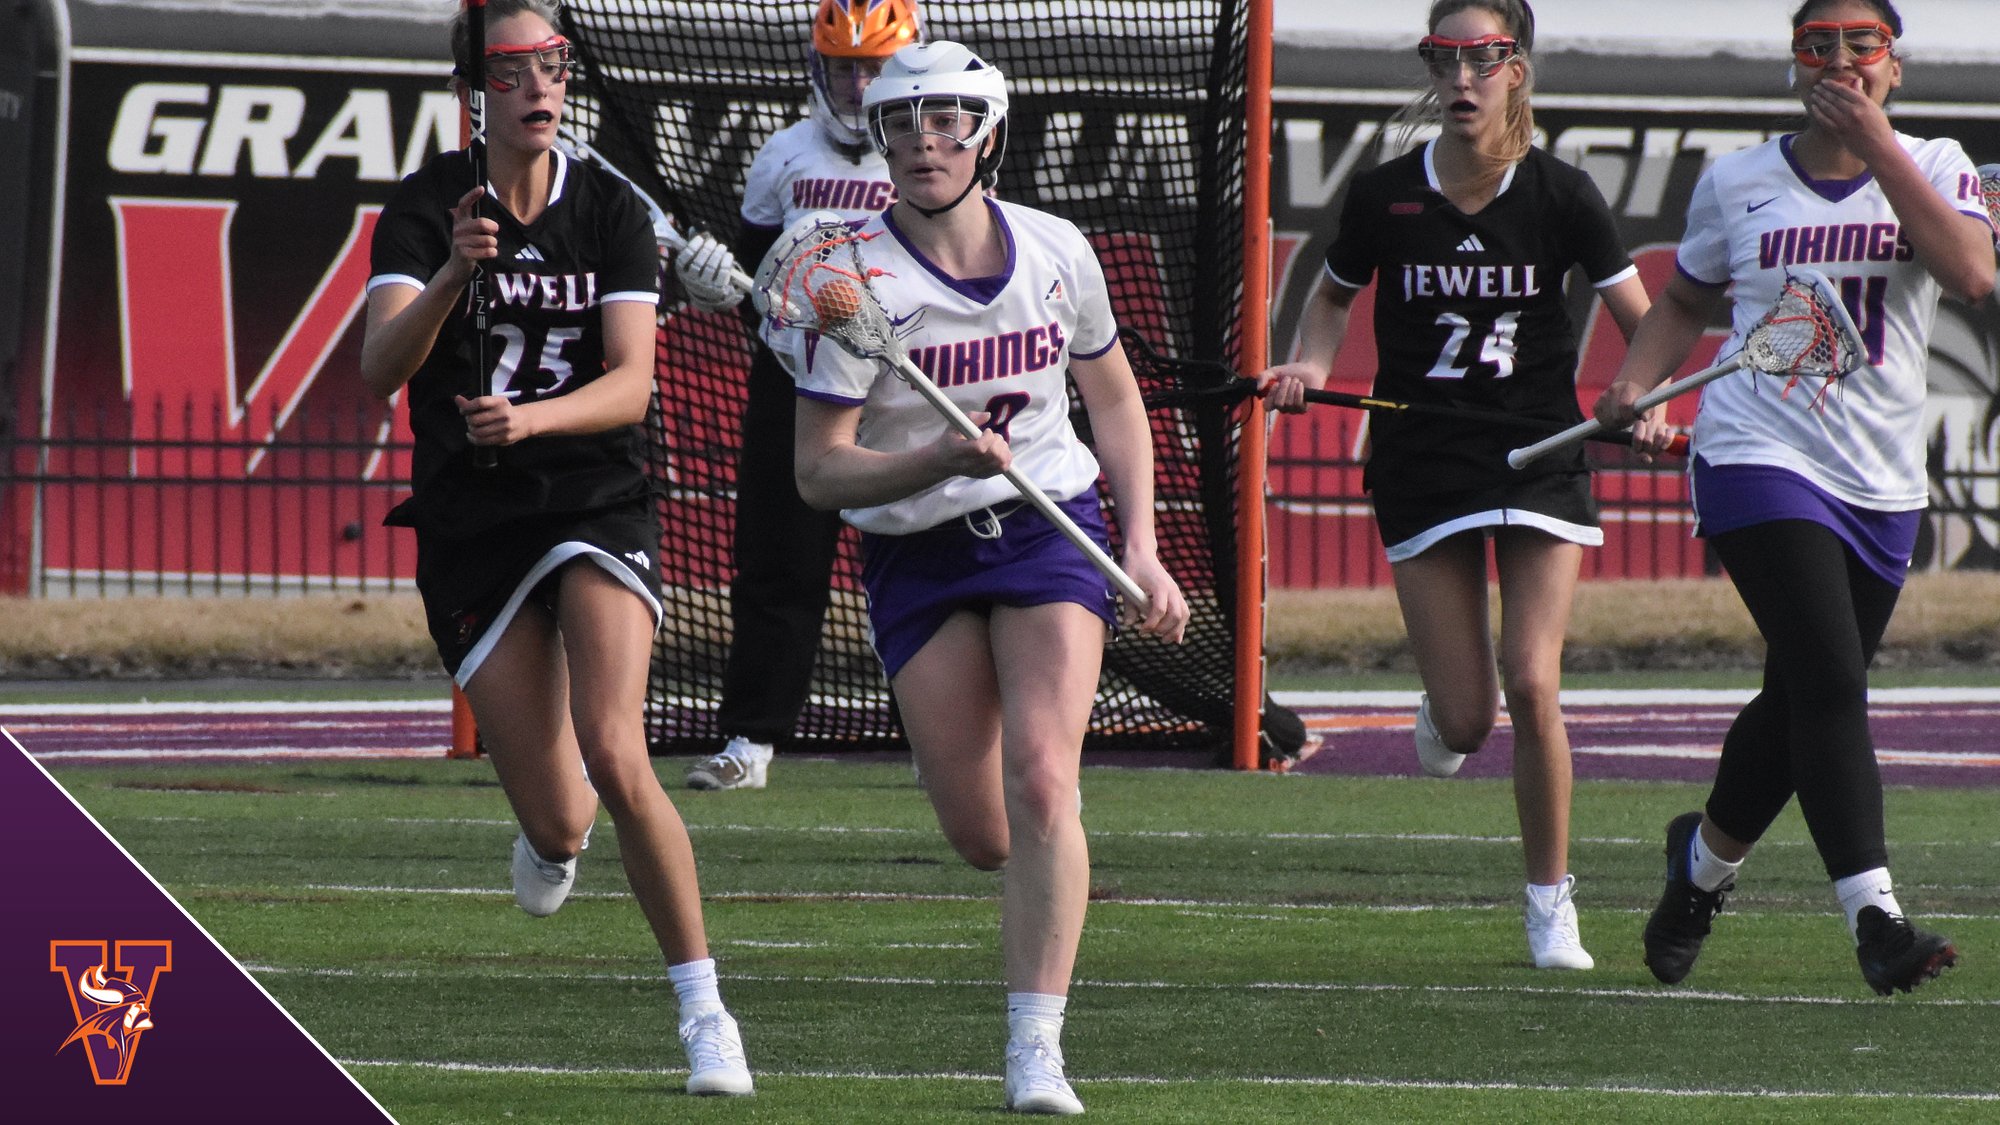 Women's Lacrosse Drops Home Game to Health Sciences & Pharmacy